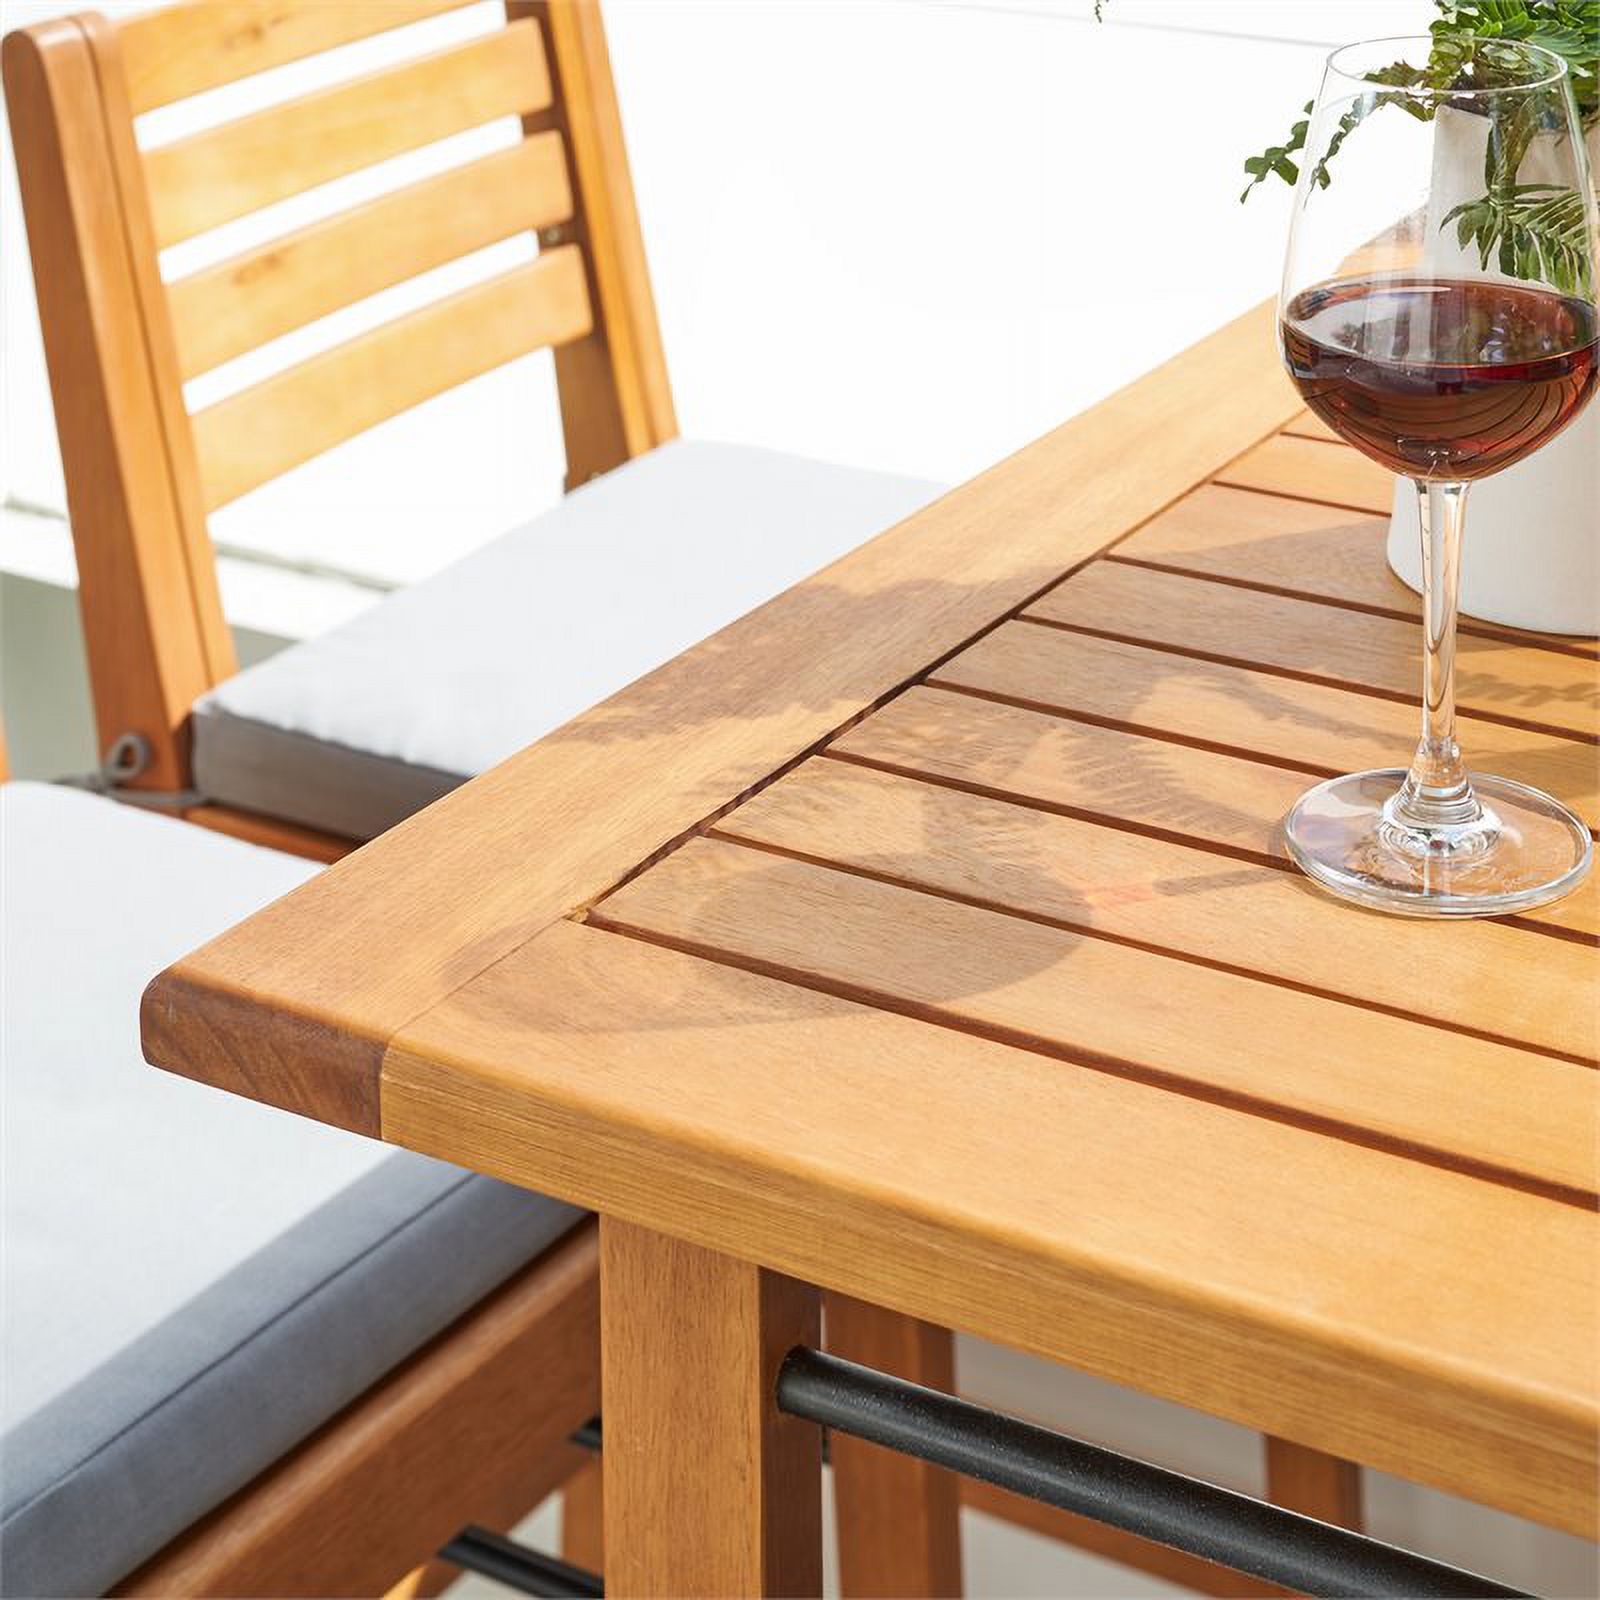 Gloucester Outdoor Patio Wood Dining Table - image 4 of 4